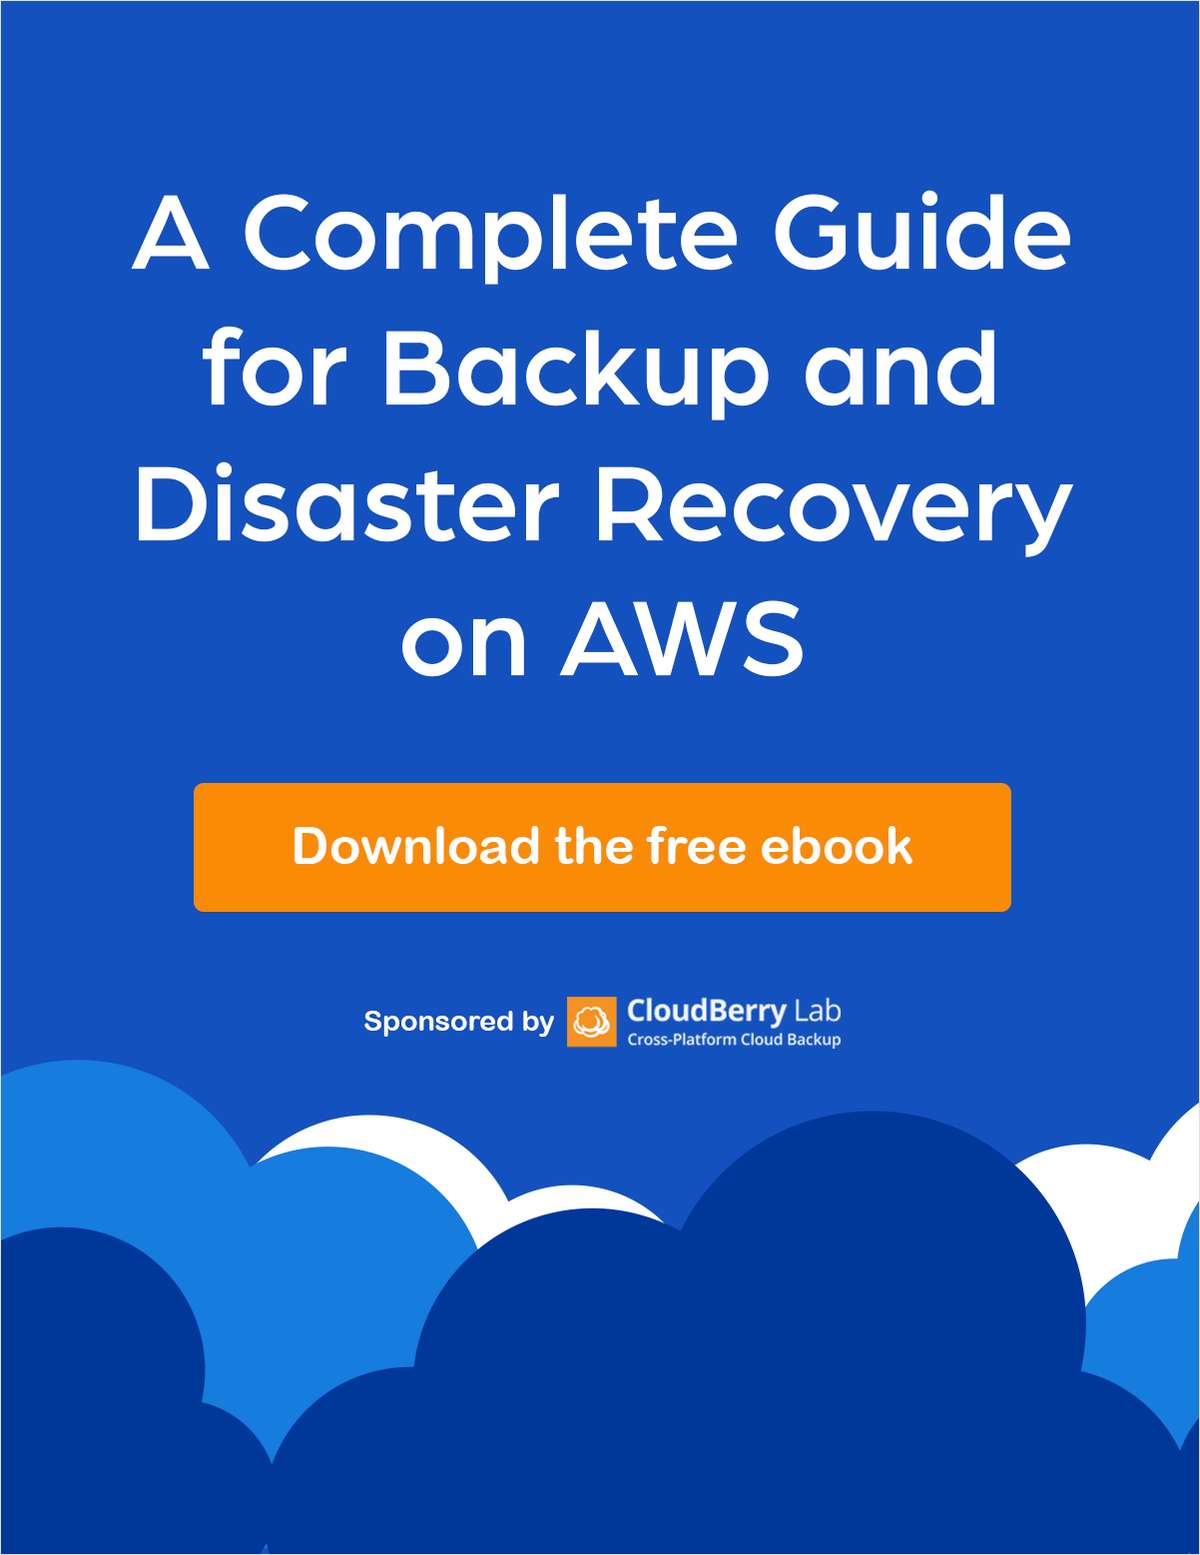 A Complete Guide for Backup and Disaster Recovery on AWS